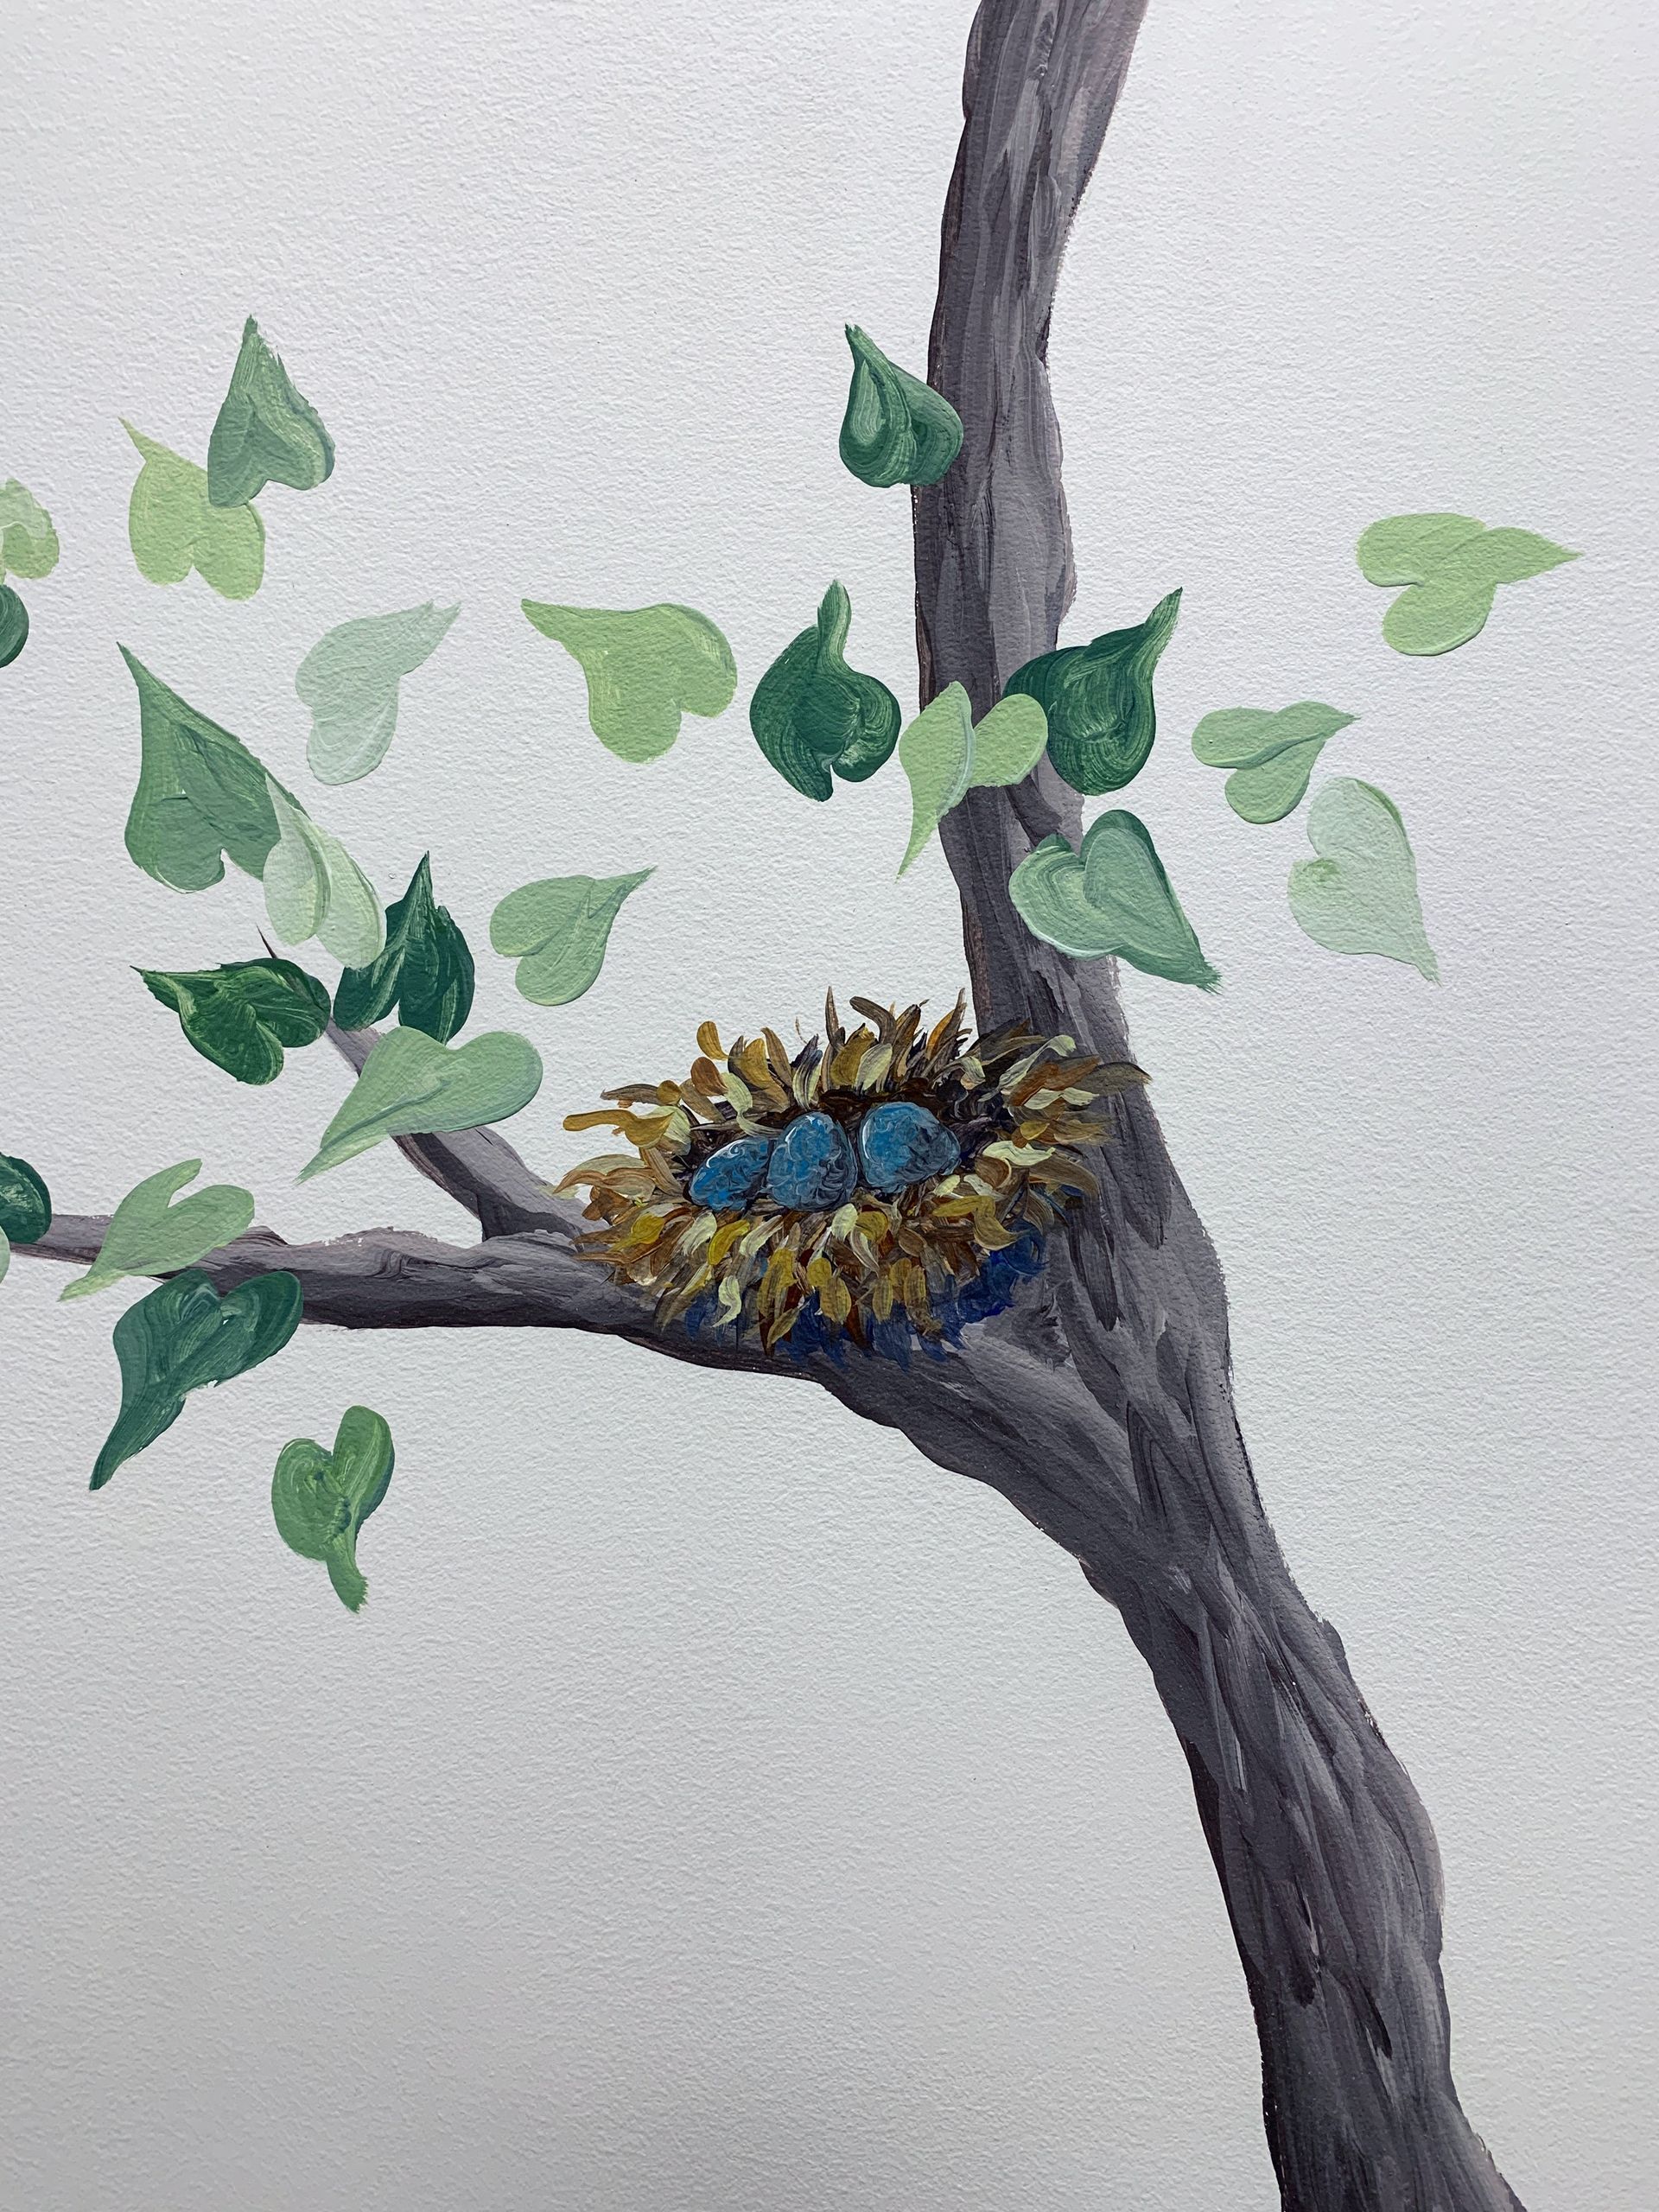 Painting of a bird's nest with eggs in it on a leafy tree branch